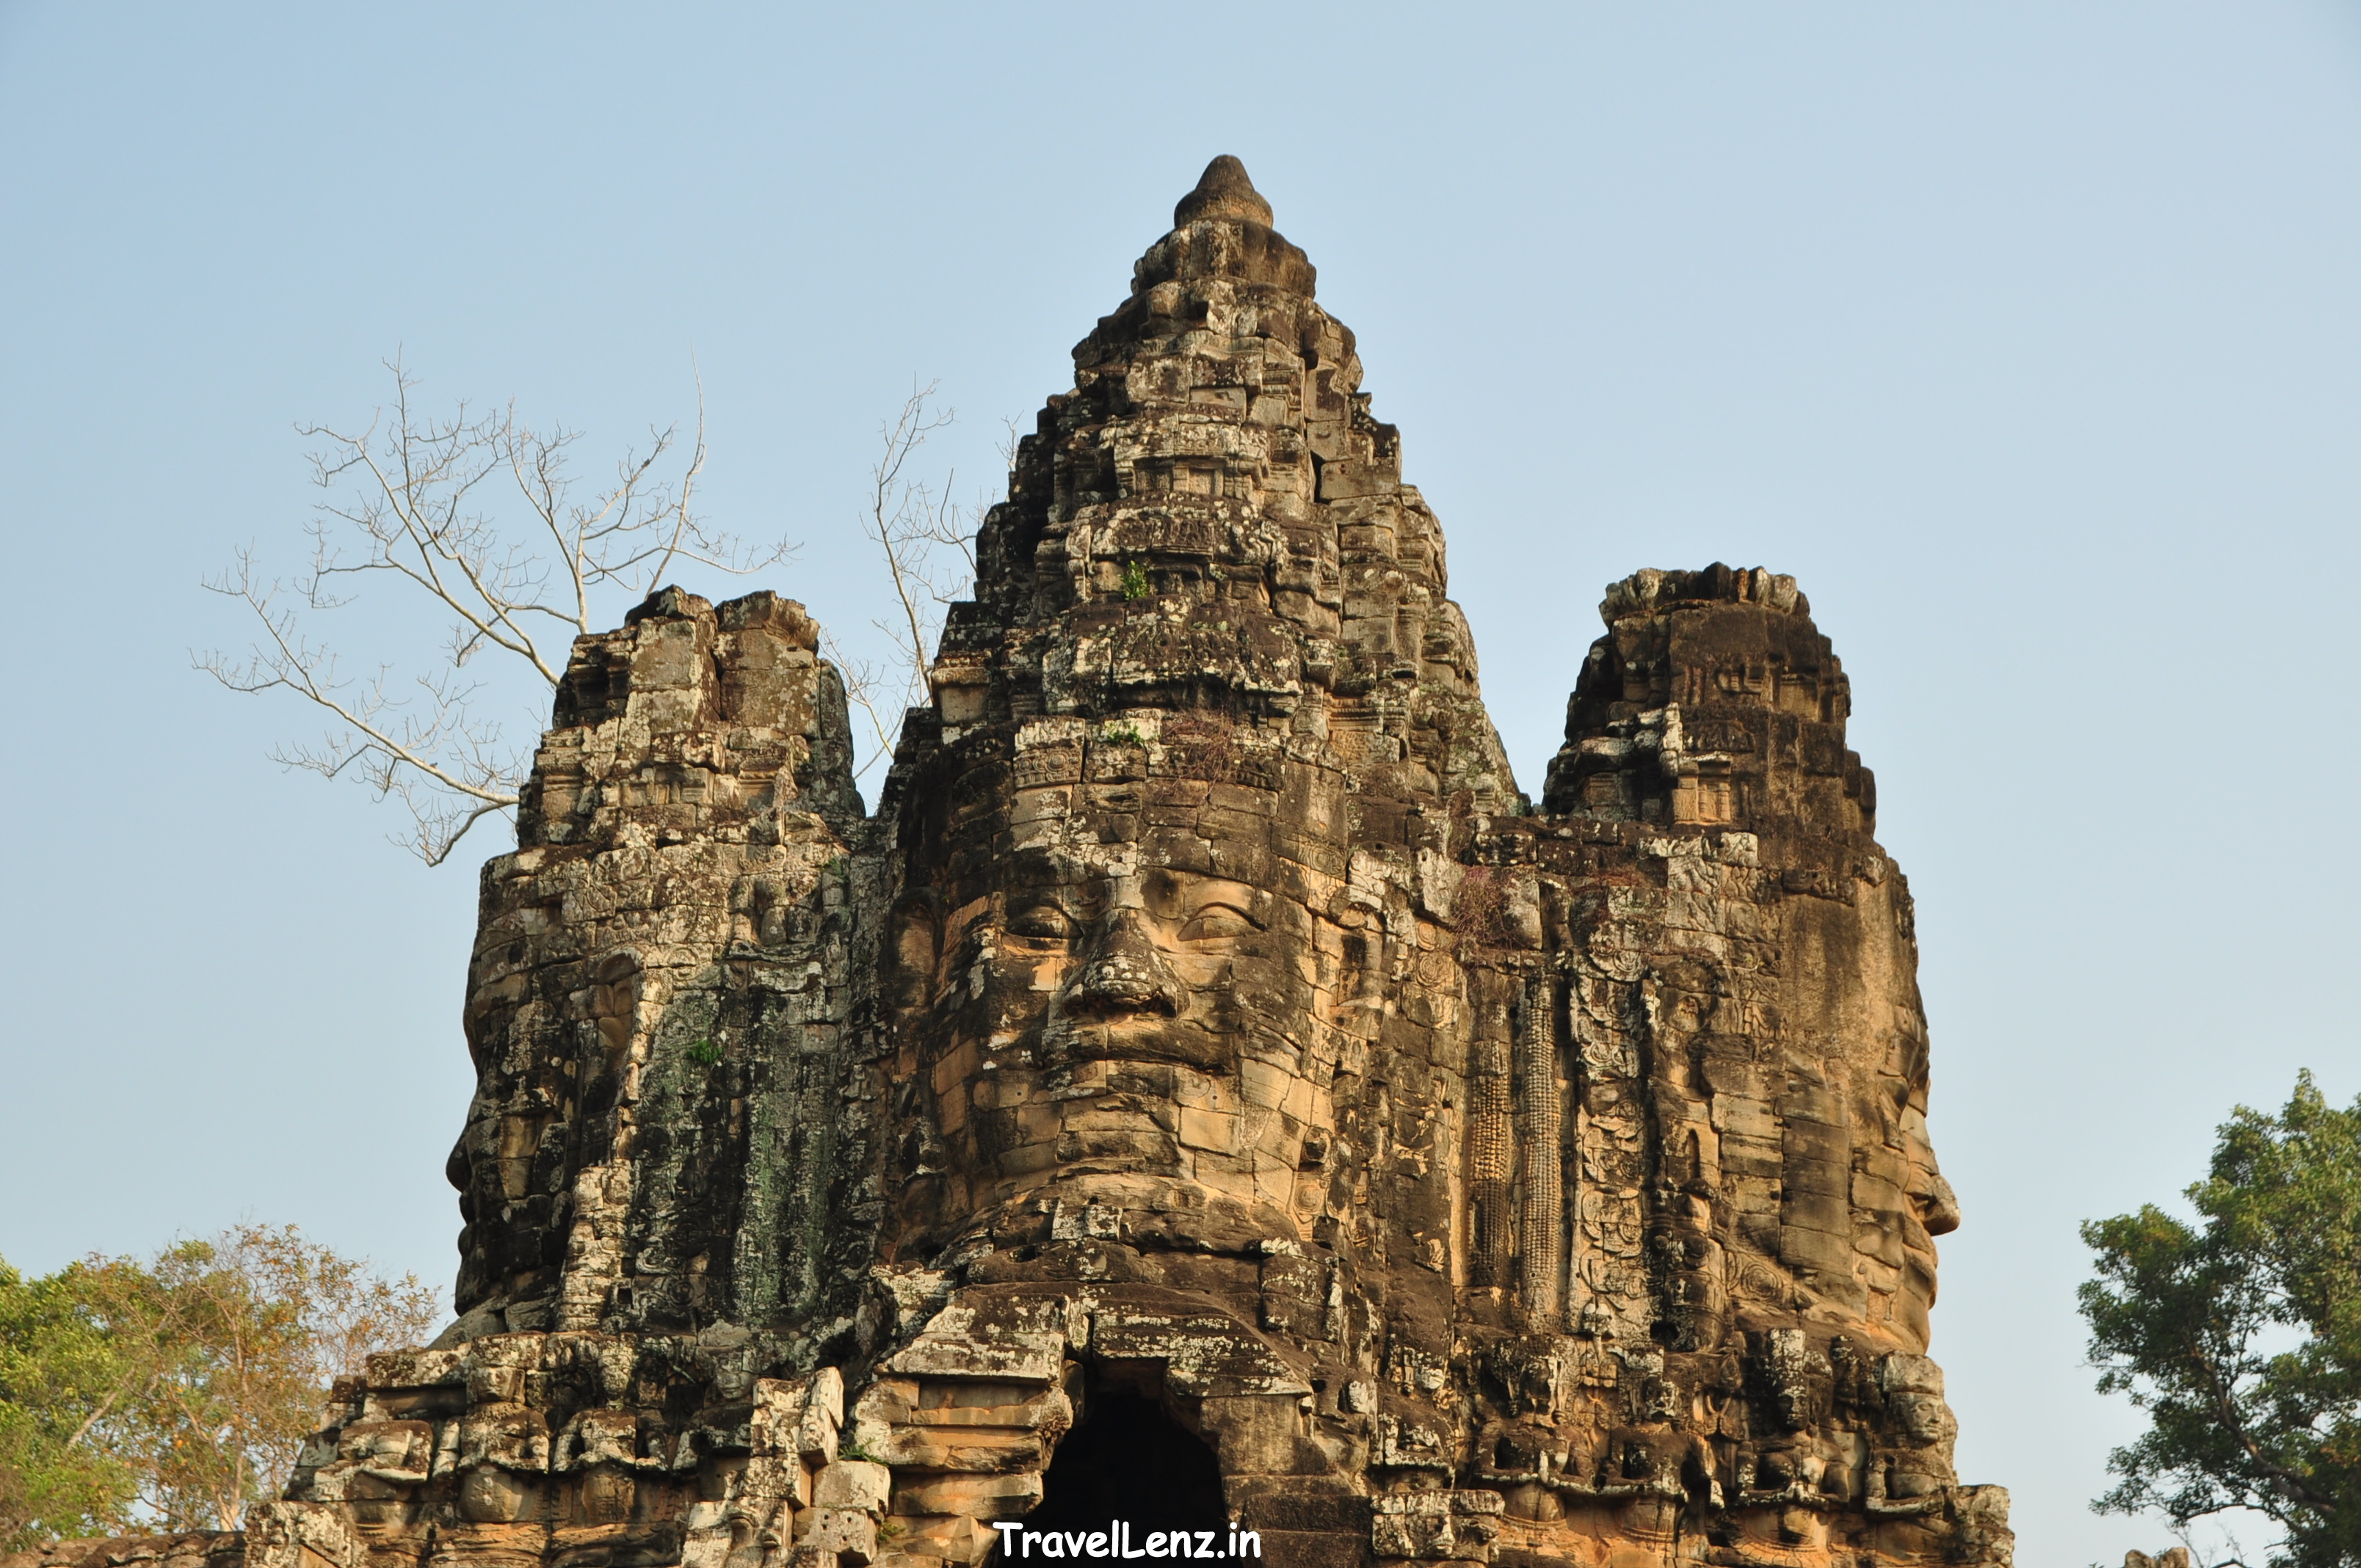 South gate tower of Angkor Thom